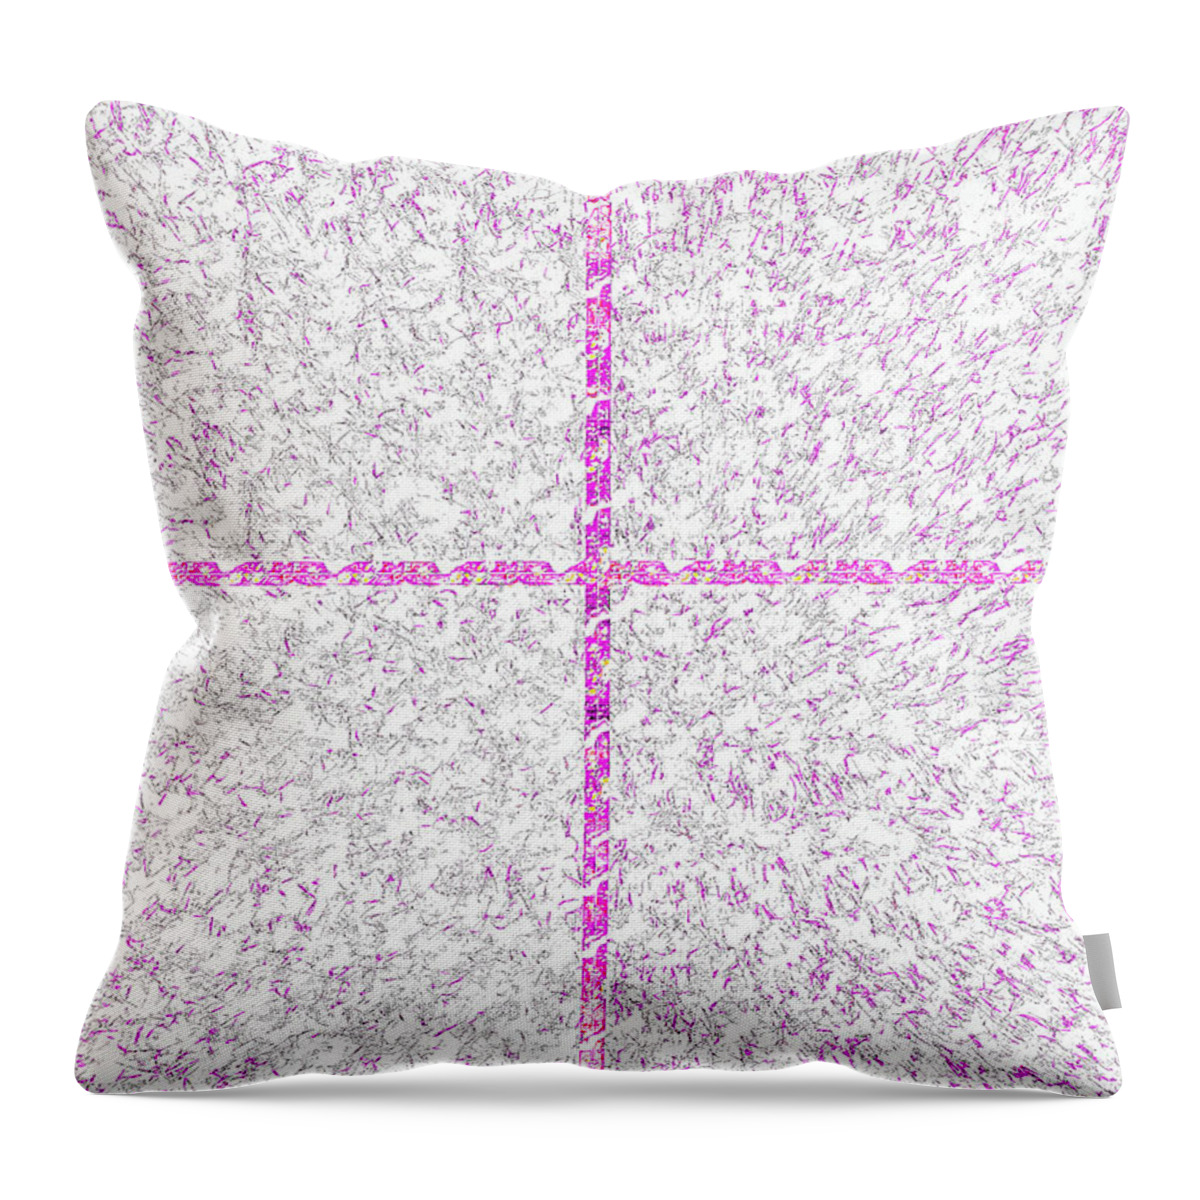 Jesus Throw Pillow featuring the digital art Cheer Up by Payet Emmanuel